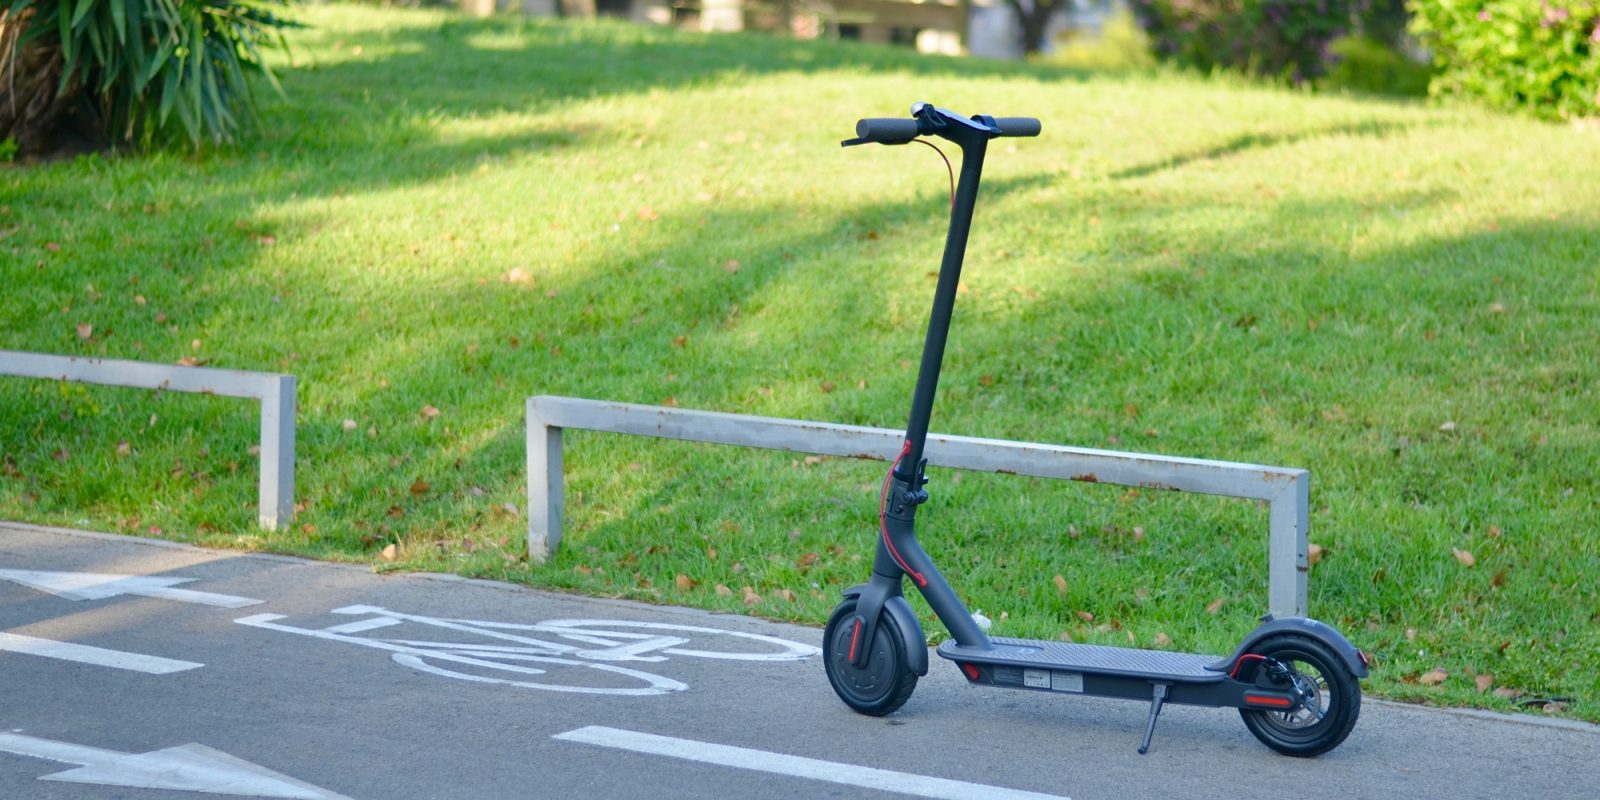 The scooters Xiaomi found a vulnerability that allows anyone to control them remotely